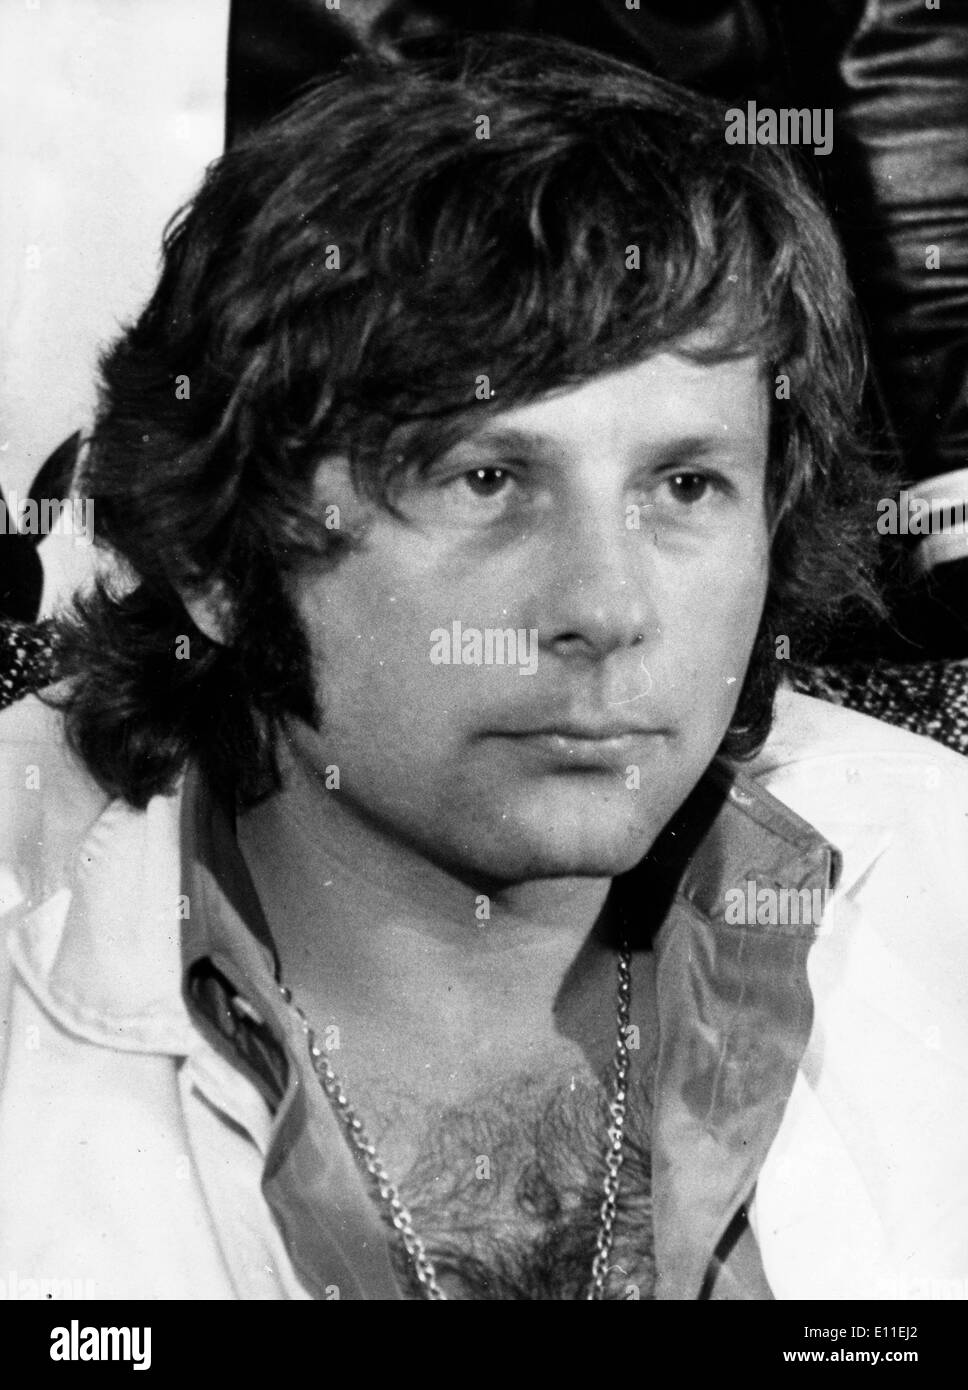 Sep 20, 1977; Paris, France; Film director and actor ROMAN POLANSKI (b. 8/18/1933) was exiled from the United States after trying to flee from incarceration, and was the husband of actress Sharon Tate who was brutally murdered by the Manson Family.. (Credit Image: KEYSTONE Pictures USA/ZUMAPRESS.com) Stock Photo